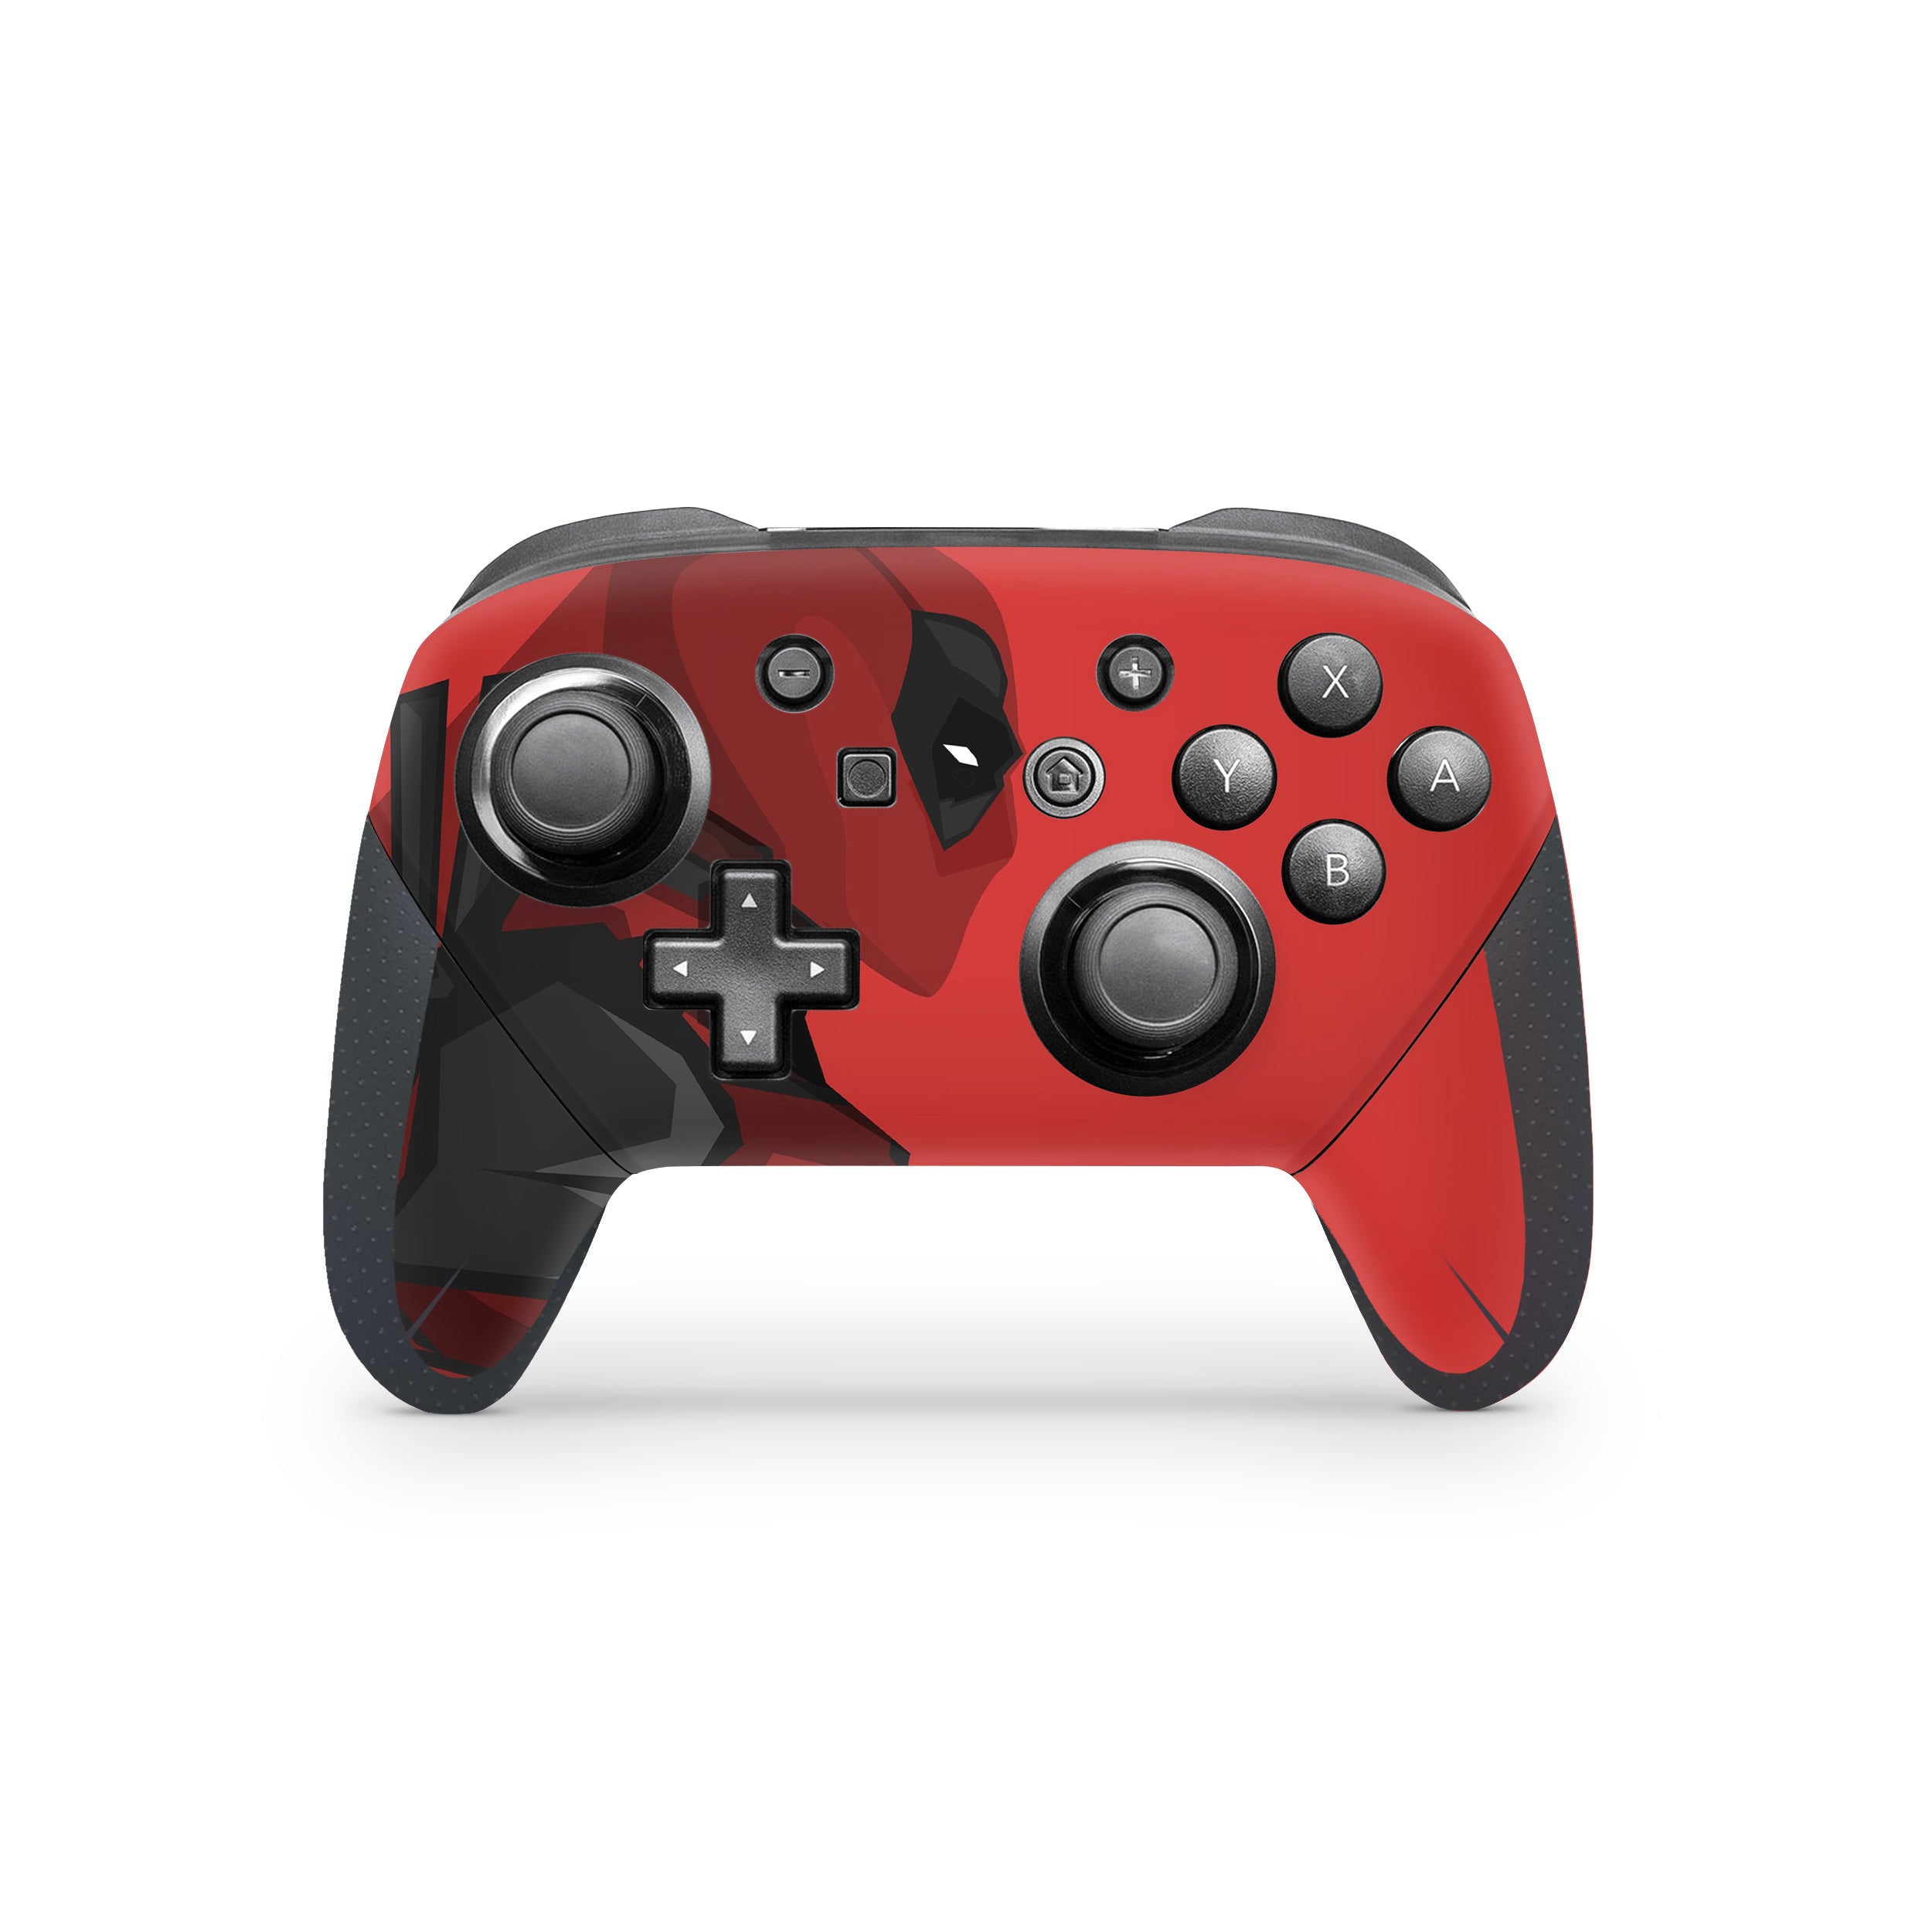 A video game skin featuring a Marvel Comics Deadpool design for the Switch Pro Controller.